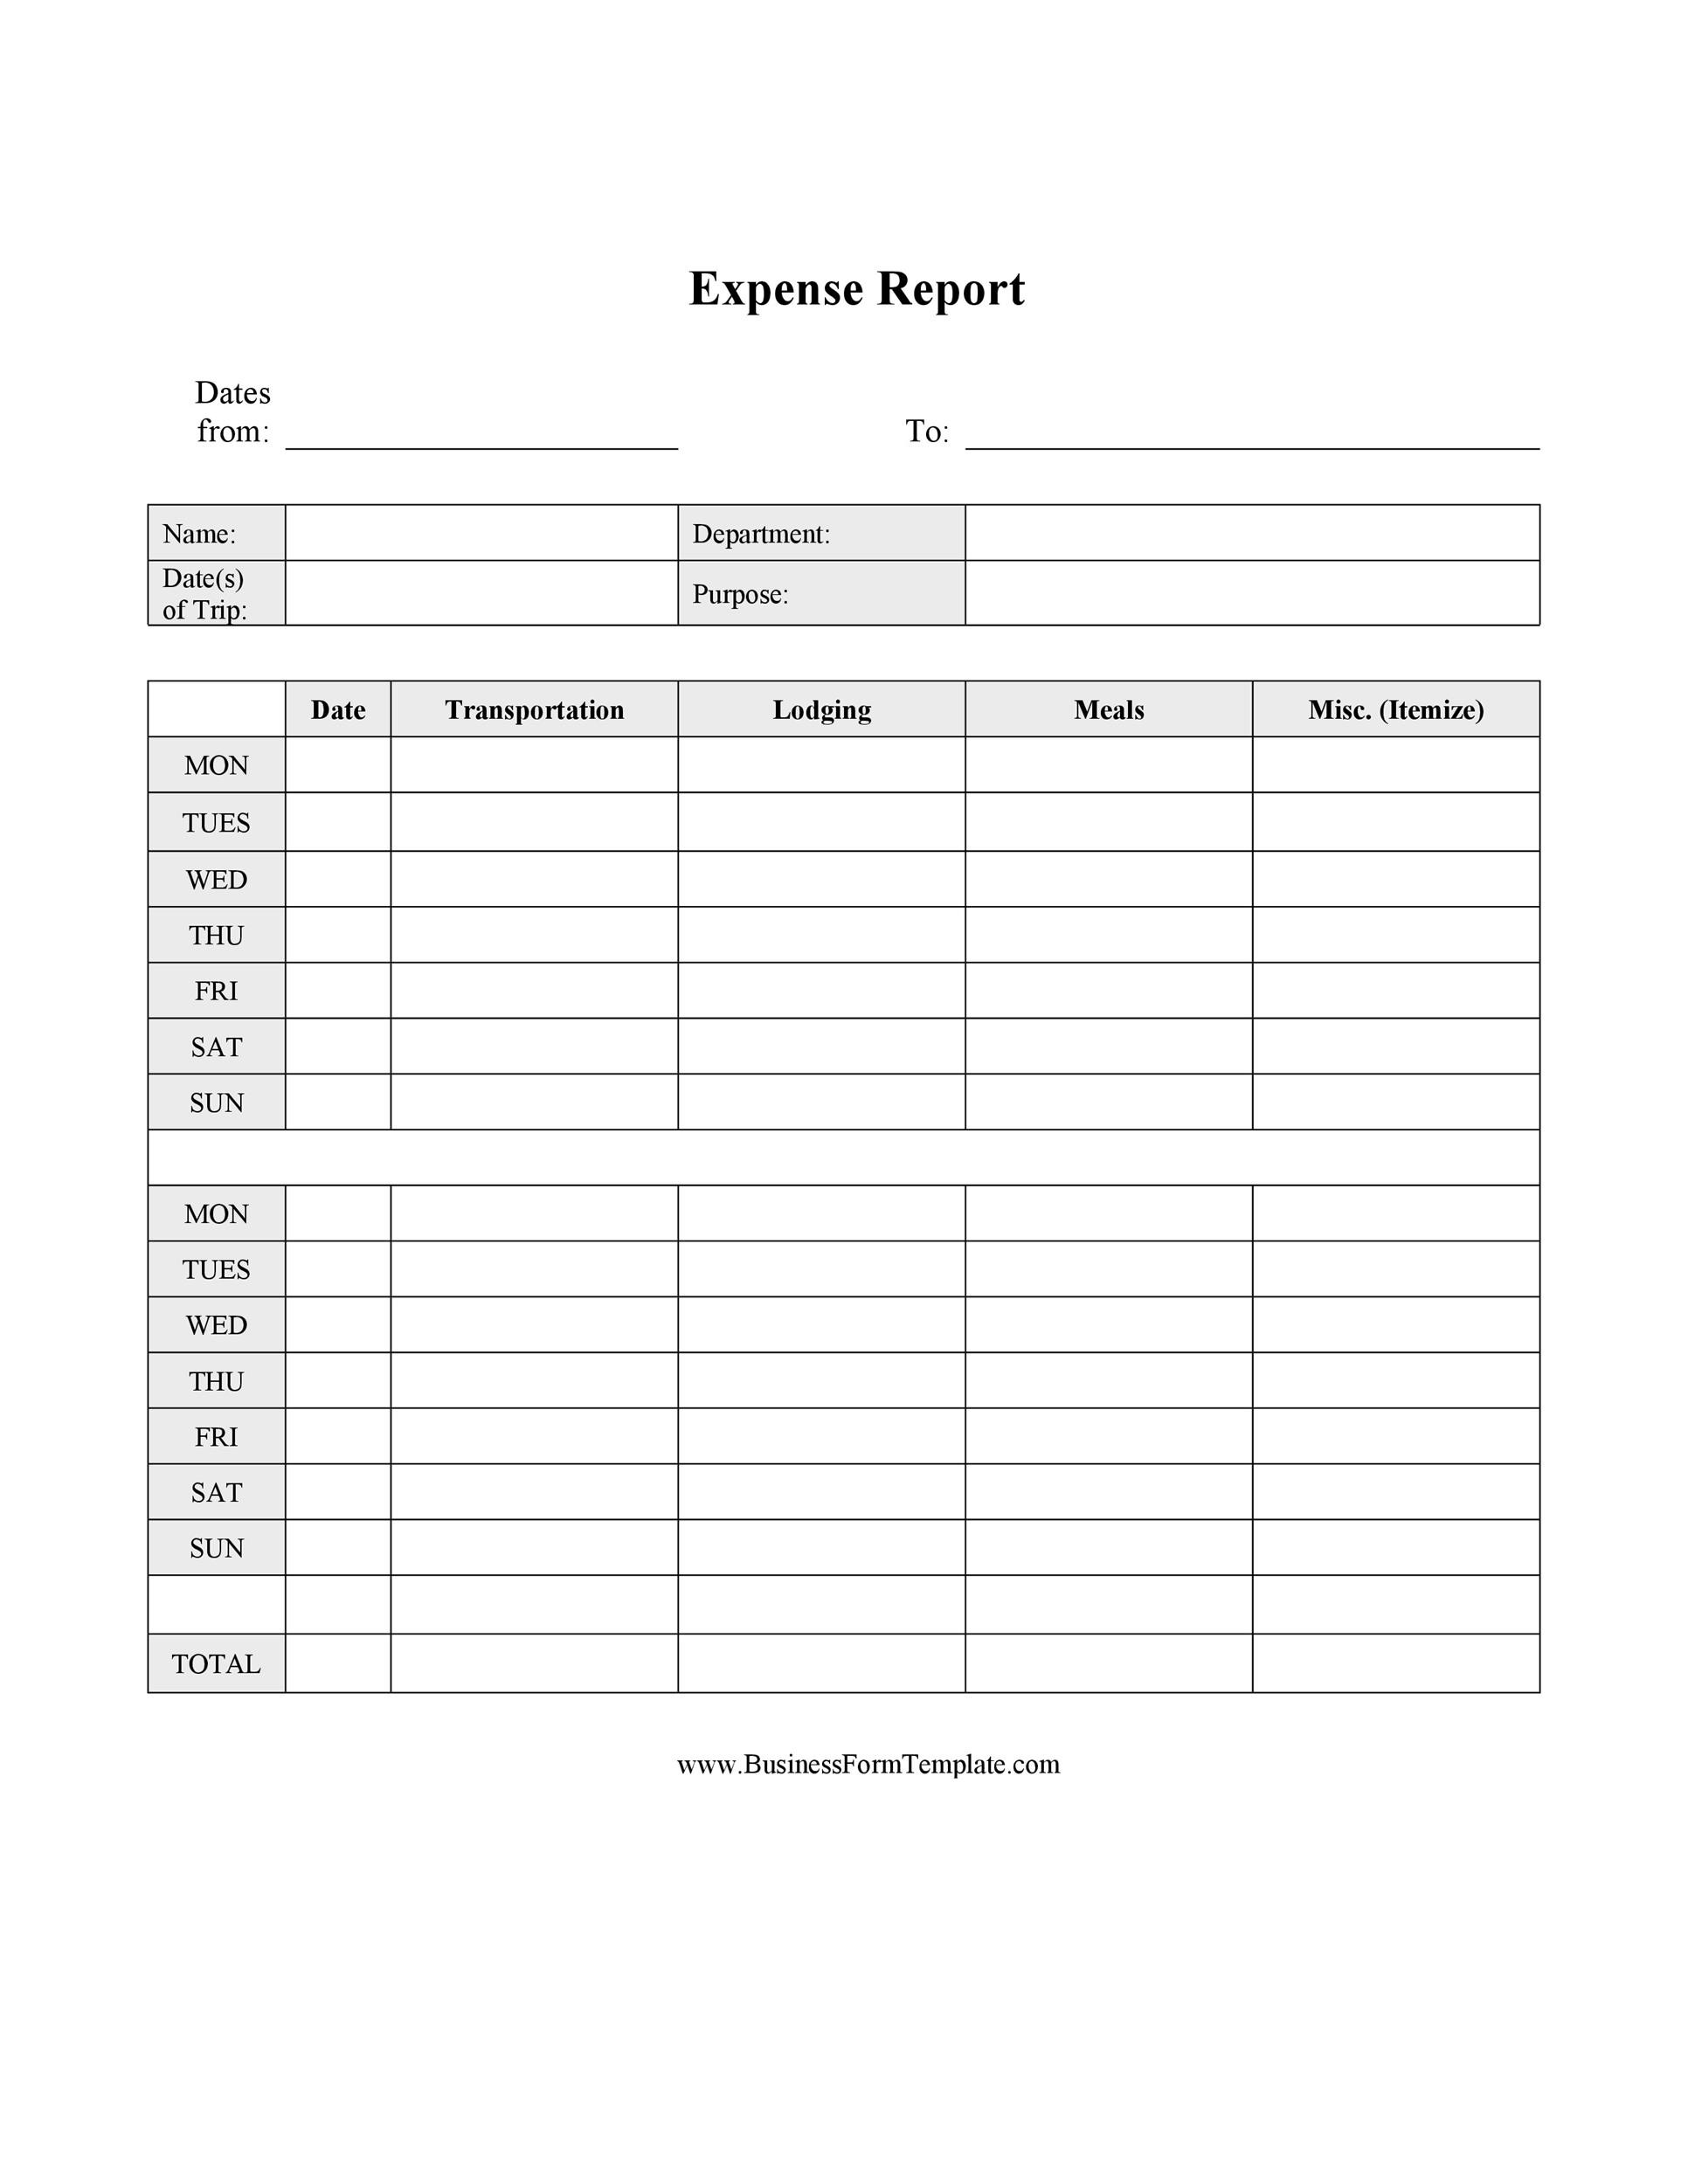 40-expense-report-templates-to-help-you-save-money-templatelab